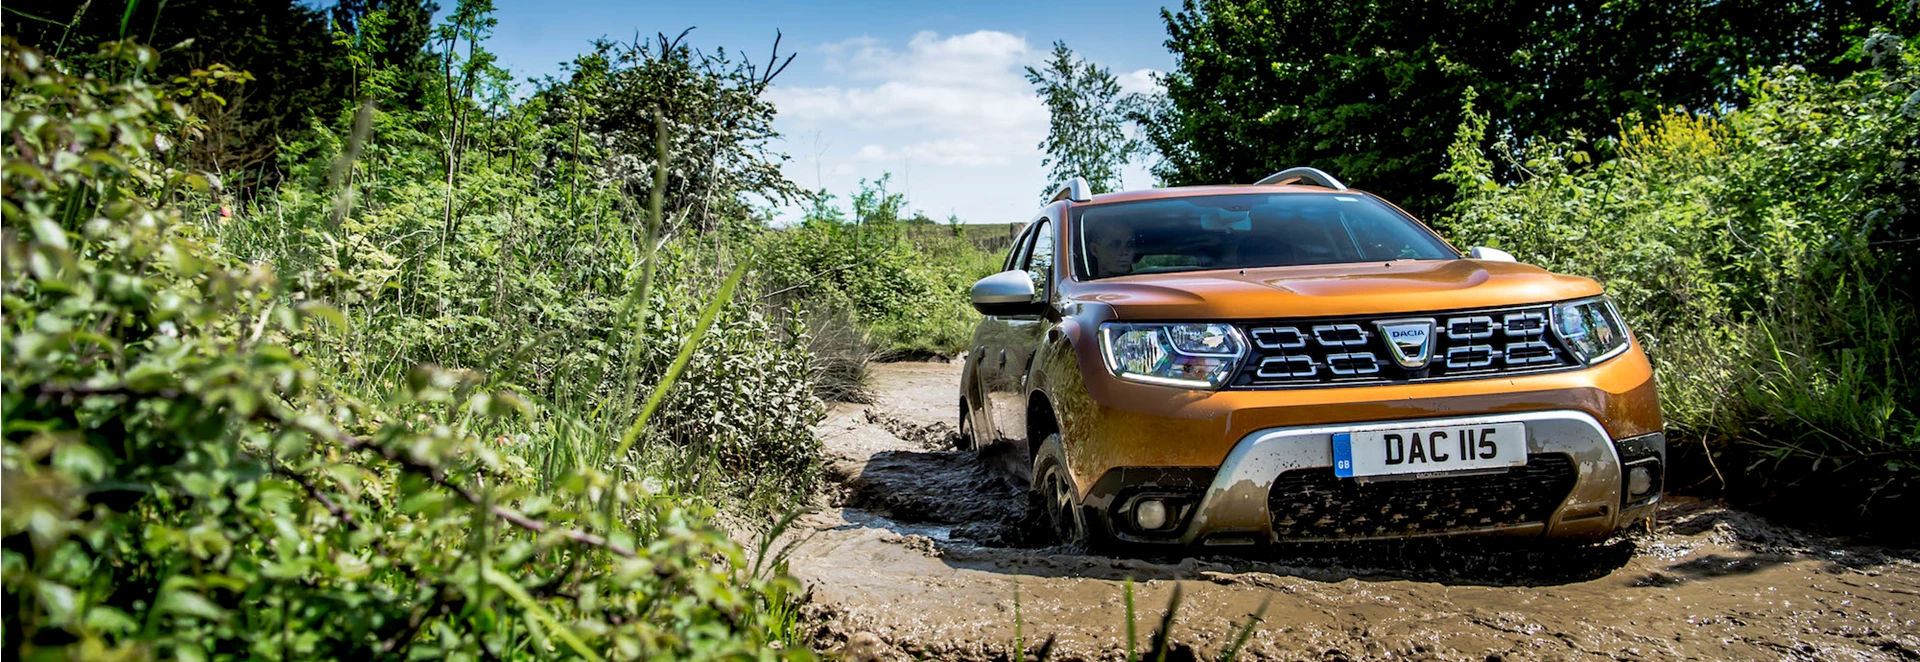 Buyer’s Guide to the Dacia Duster